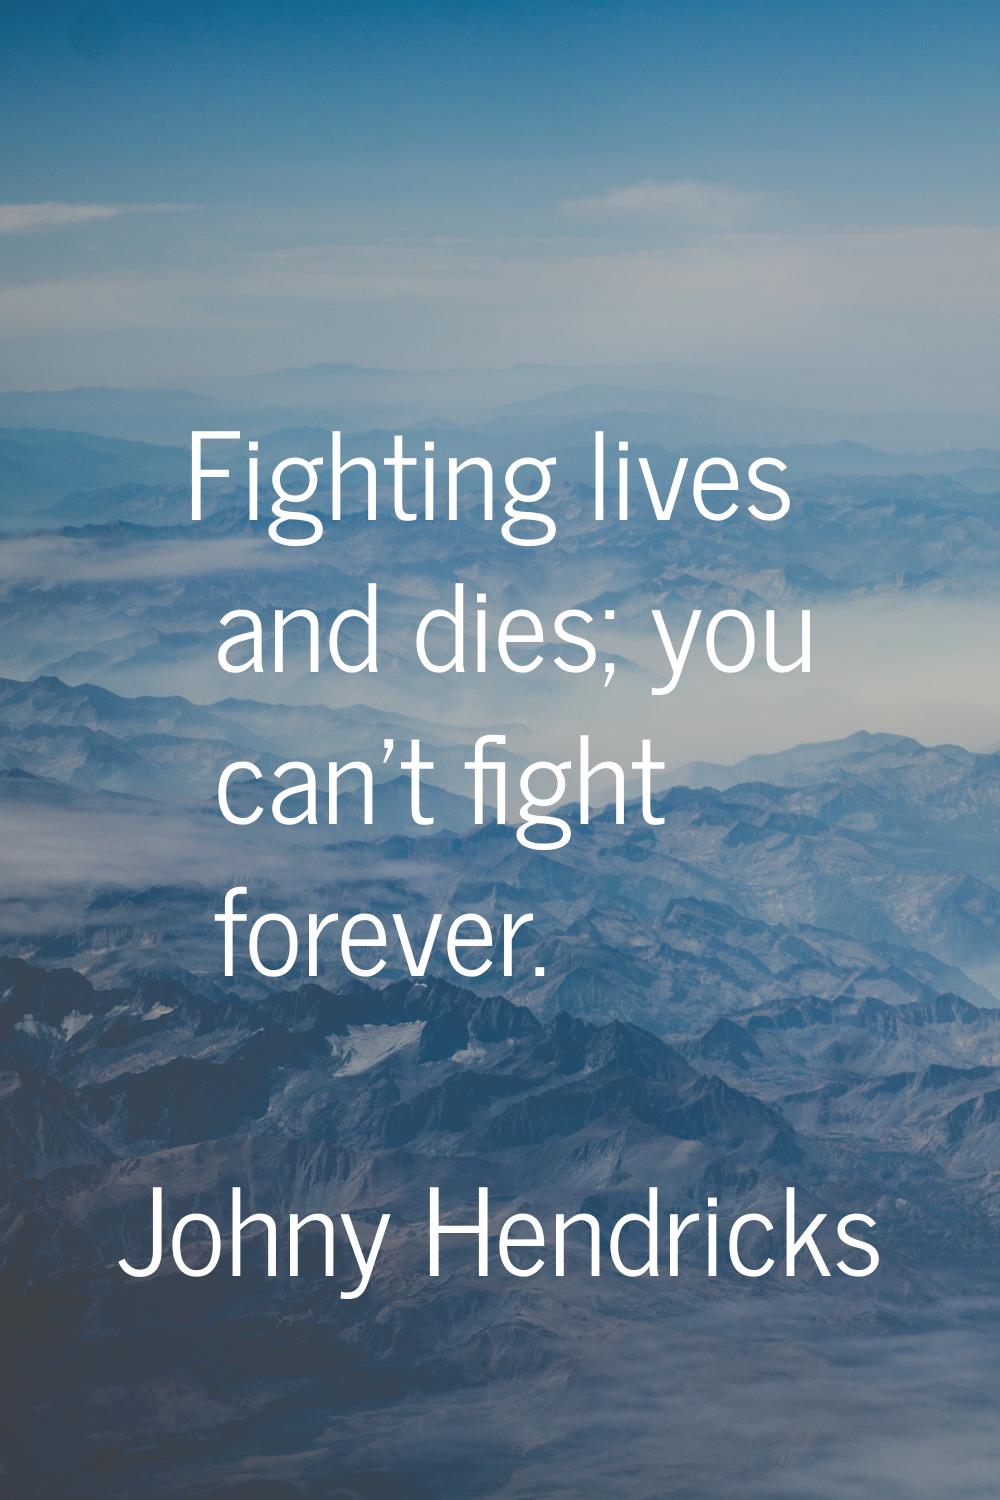 Fighting lives and dies; you can't fight forever.